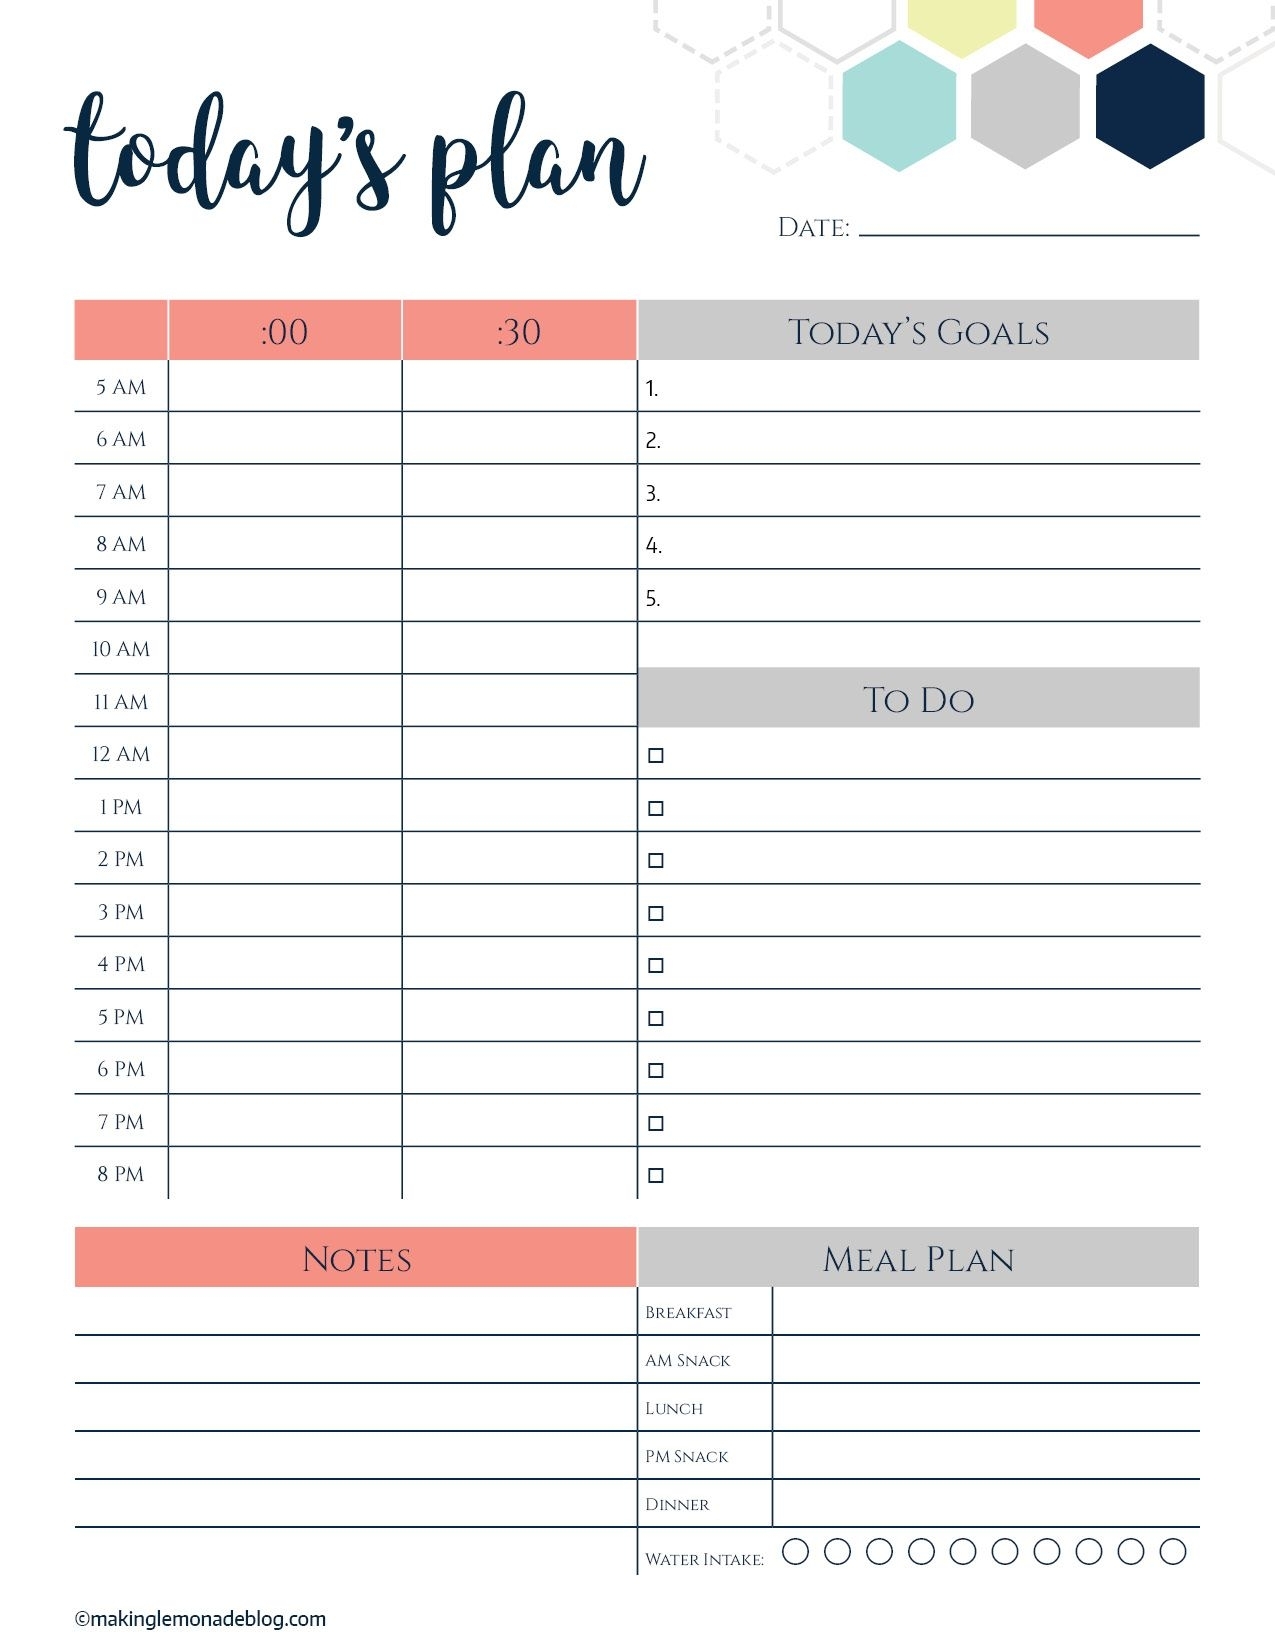 This Free Printable Daily Planner Changes Everything. Finally A Way for Daily Planner With Time Slots